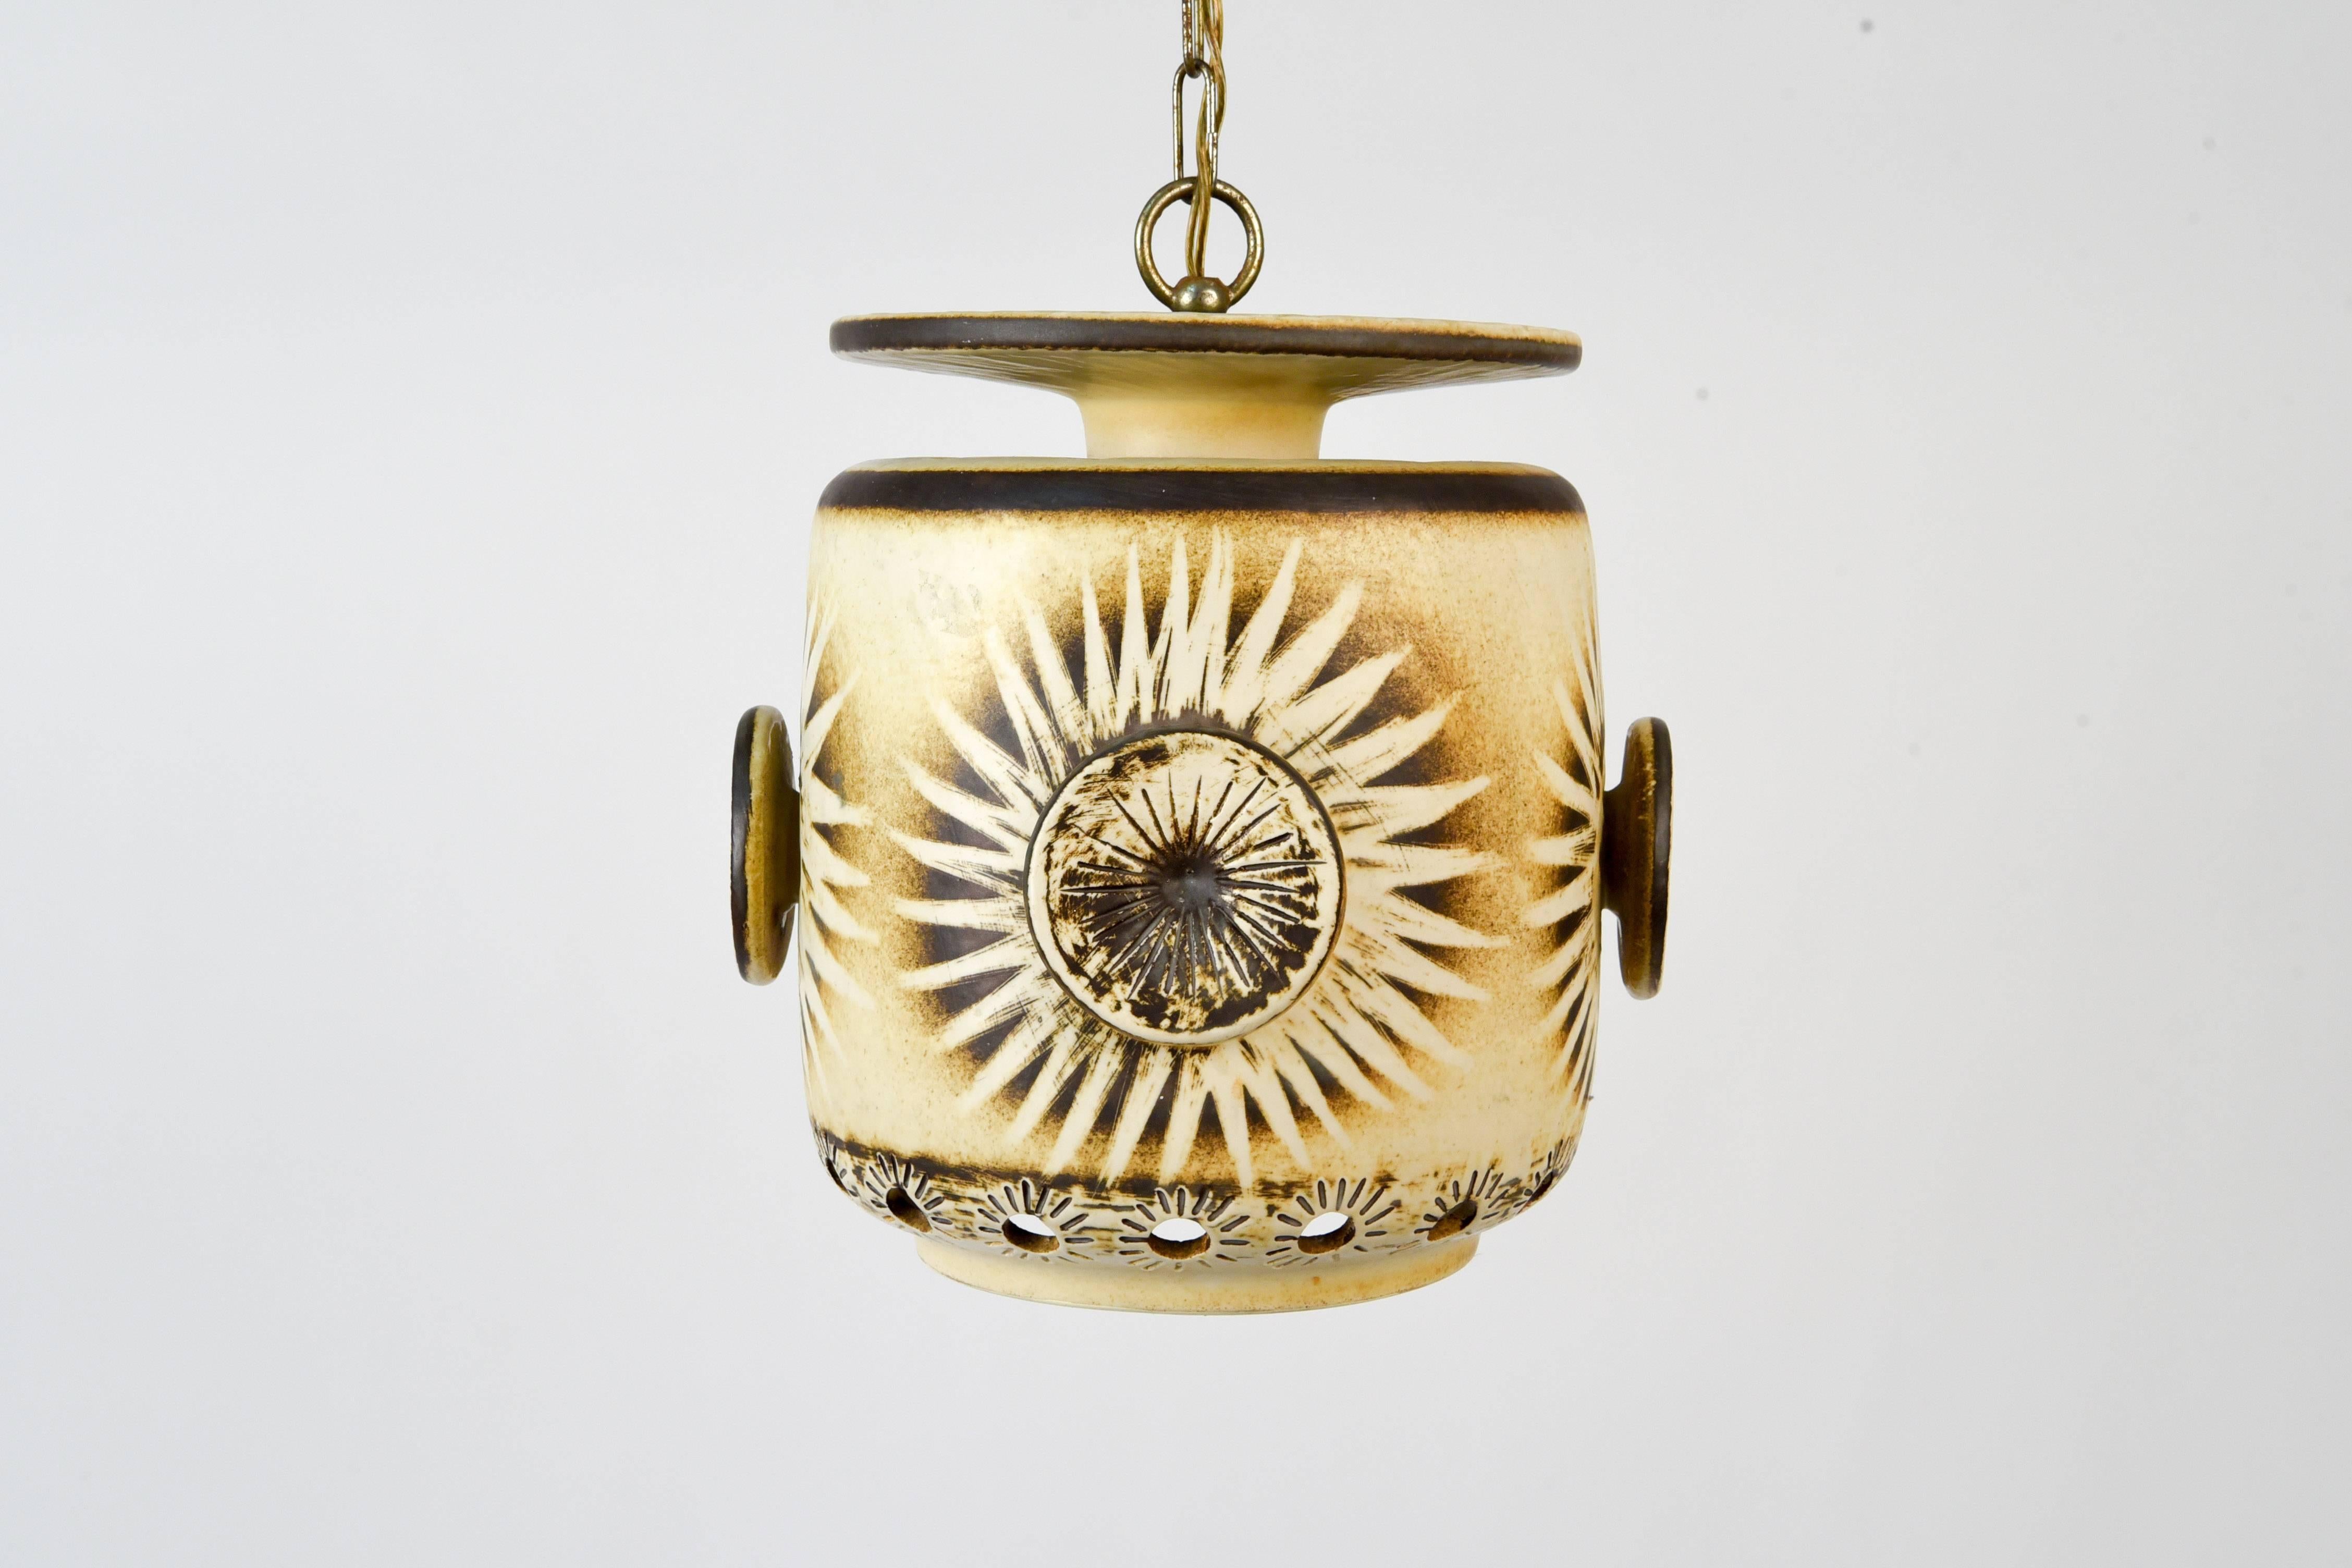 This ceramic pendant light fixture is a great way to brighten up any room. The design is reminiscent of a sunbust.